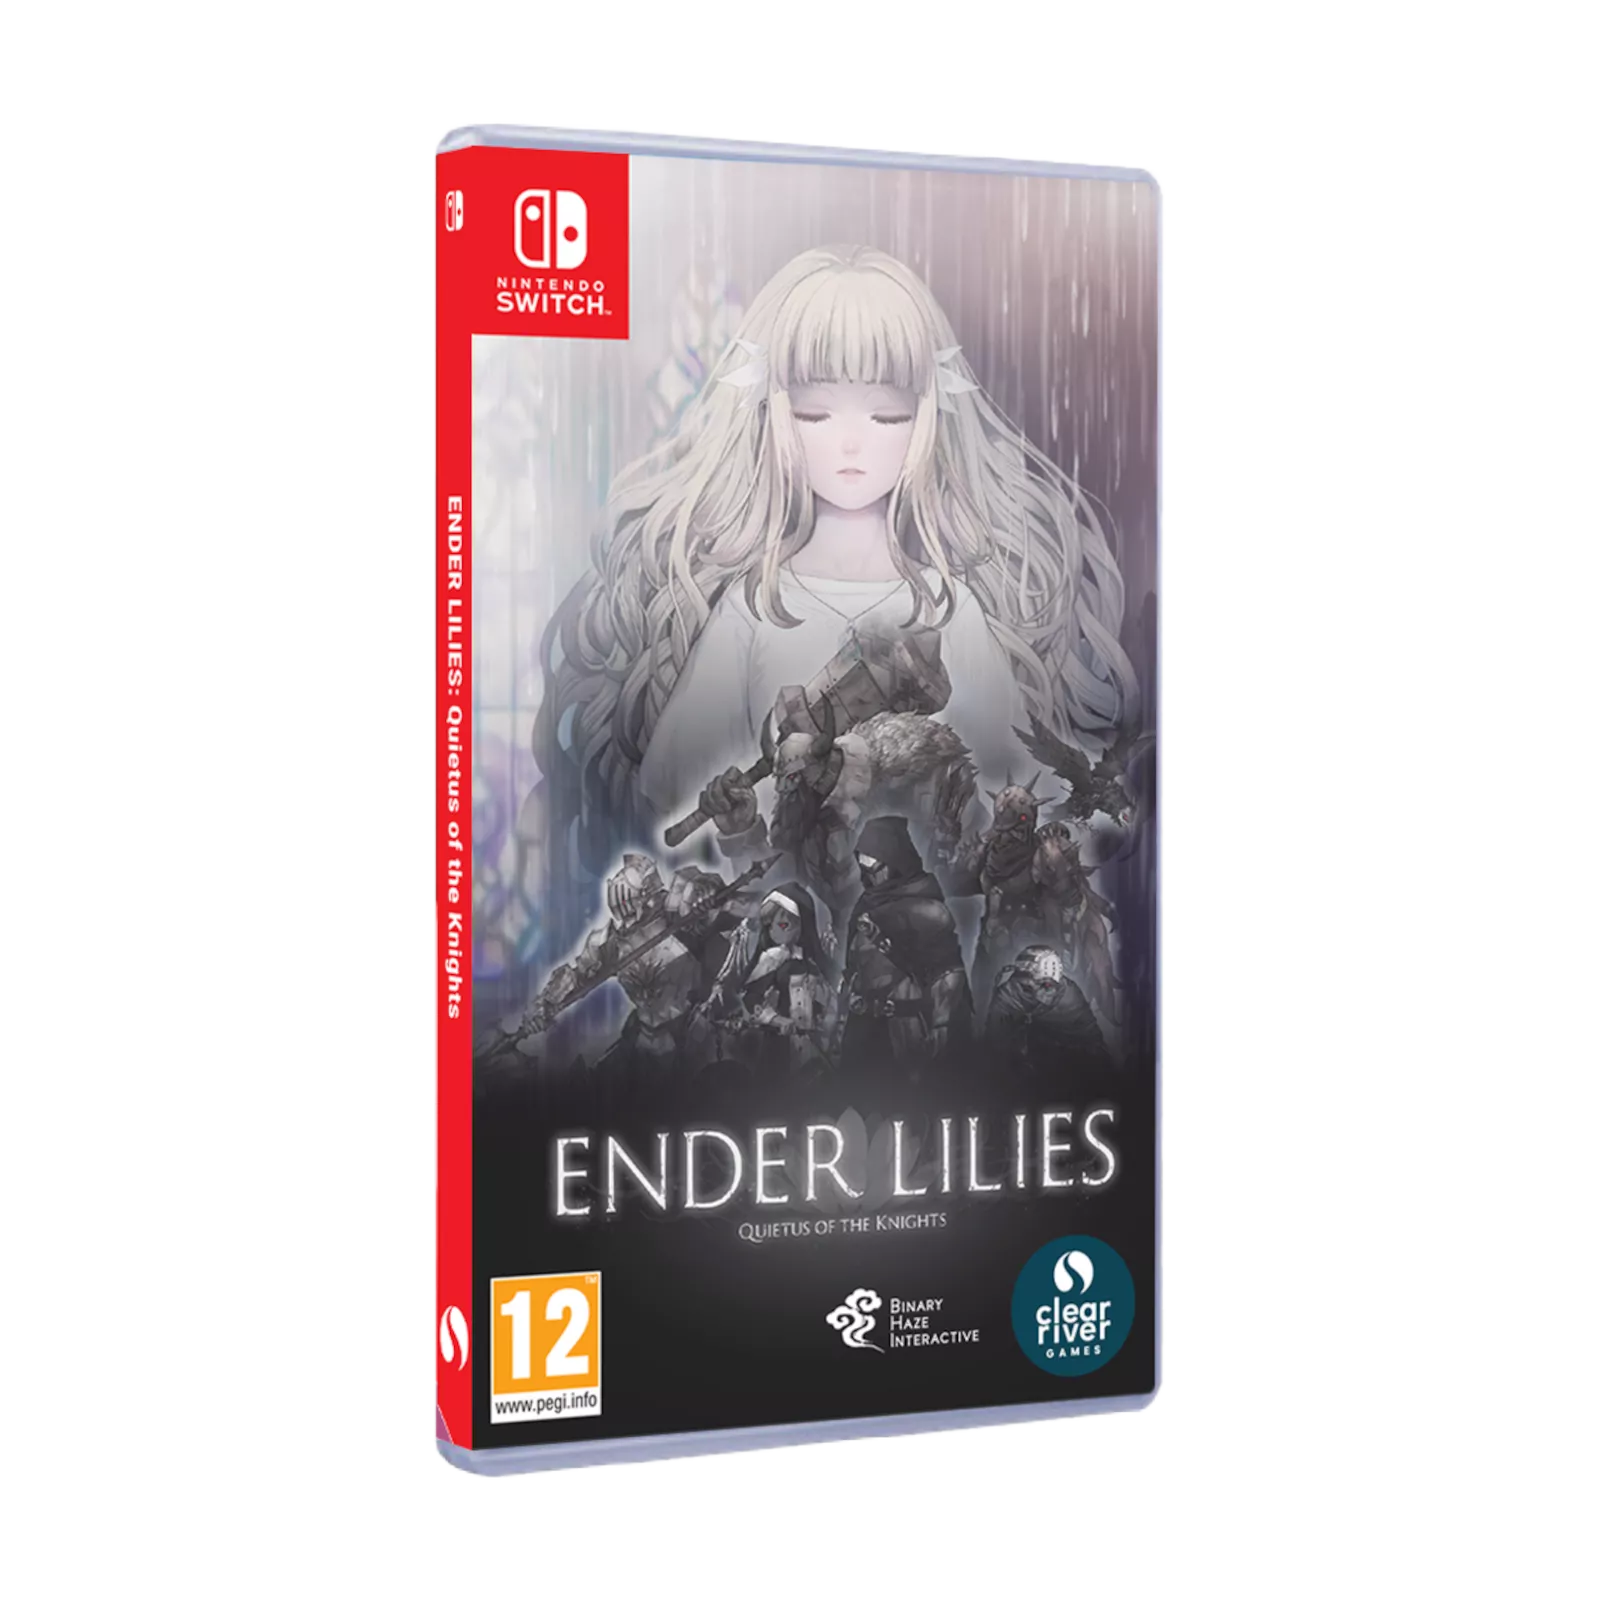 ENDER LILIES Quietus of the Knights (Nintendo Switch) ENGLISH INCLUDED US  Seller